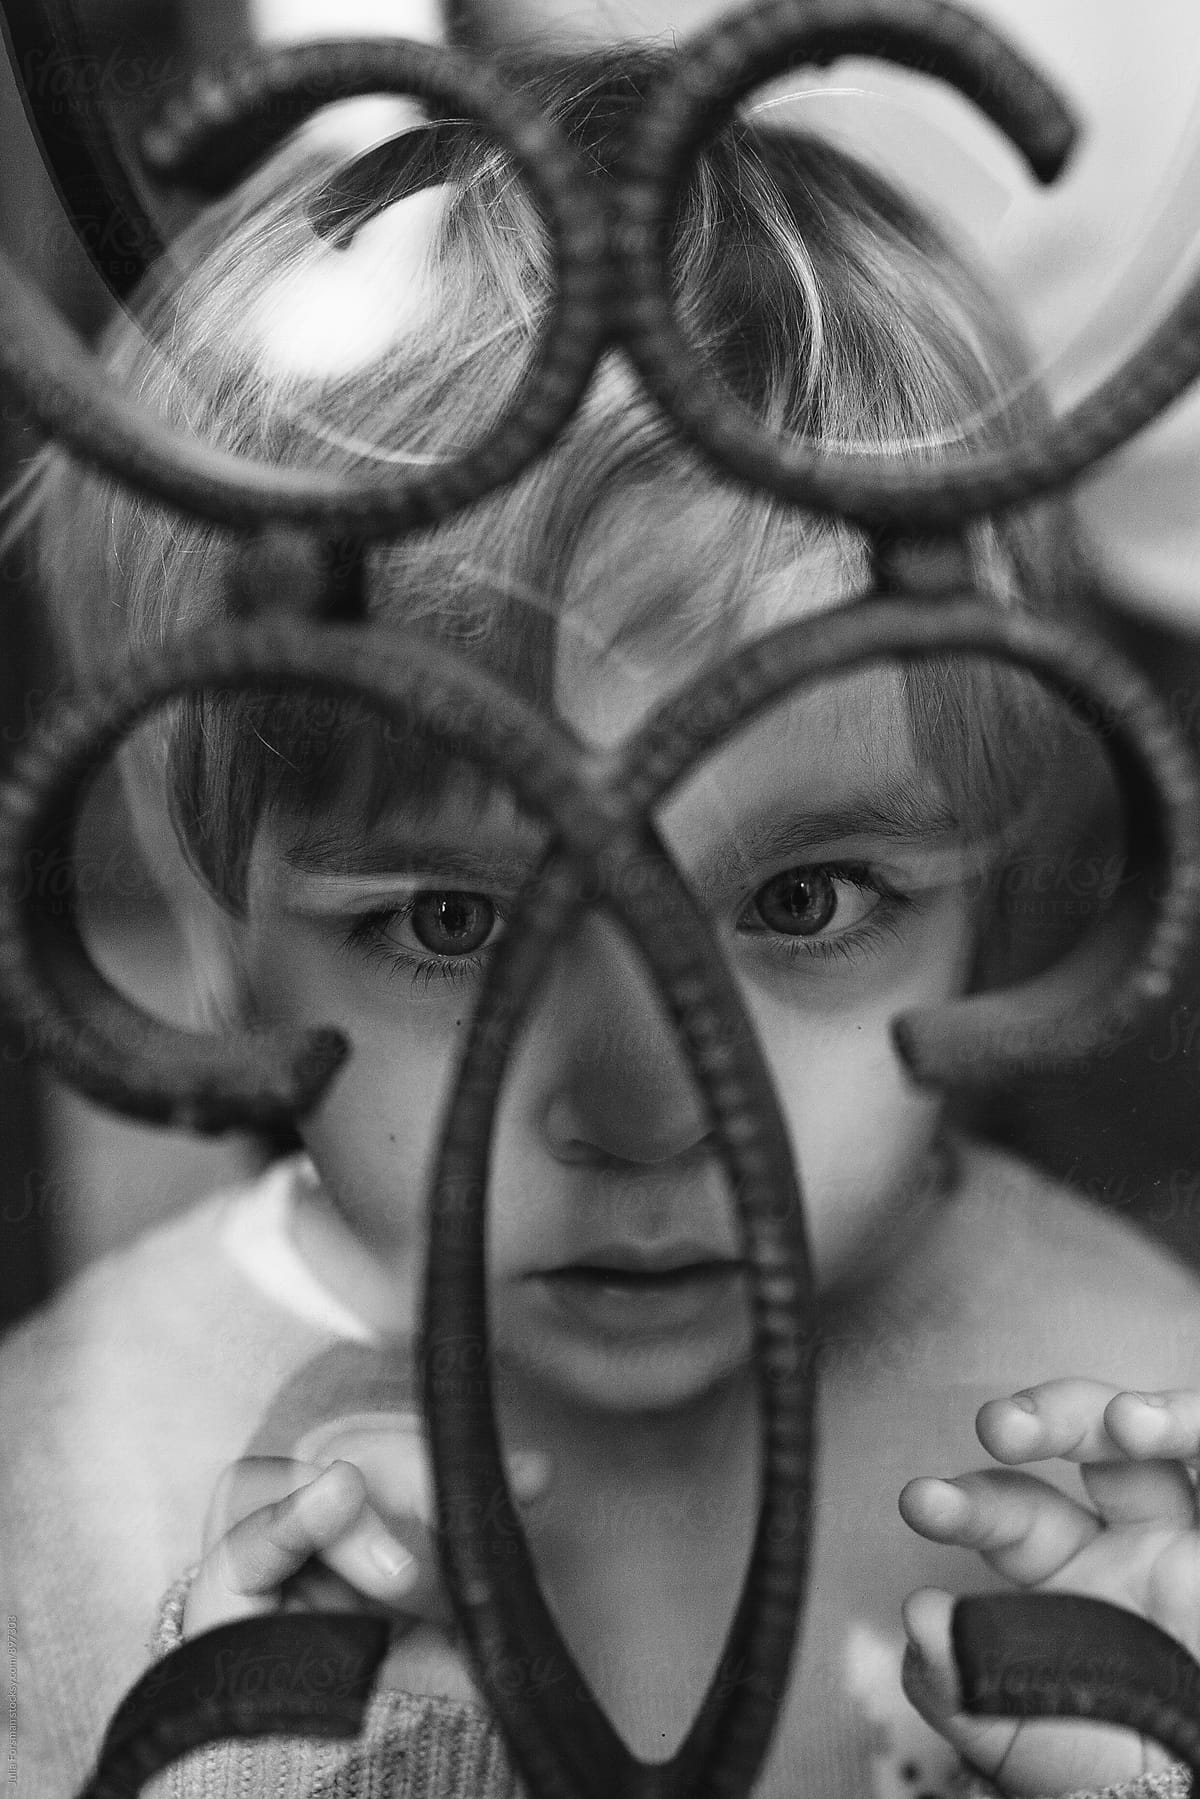 Little girl stares intensely through the curved metal bars on a window.